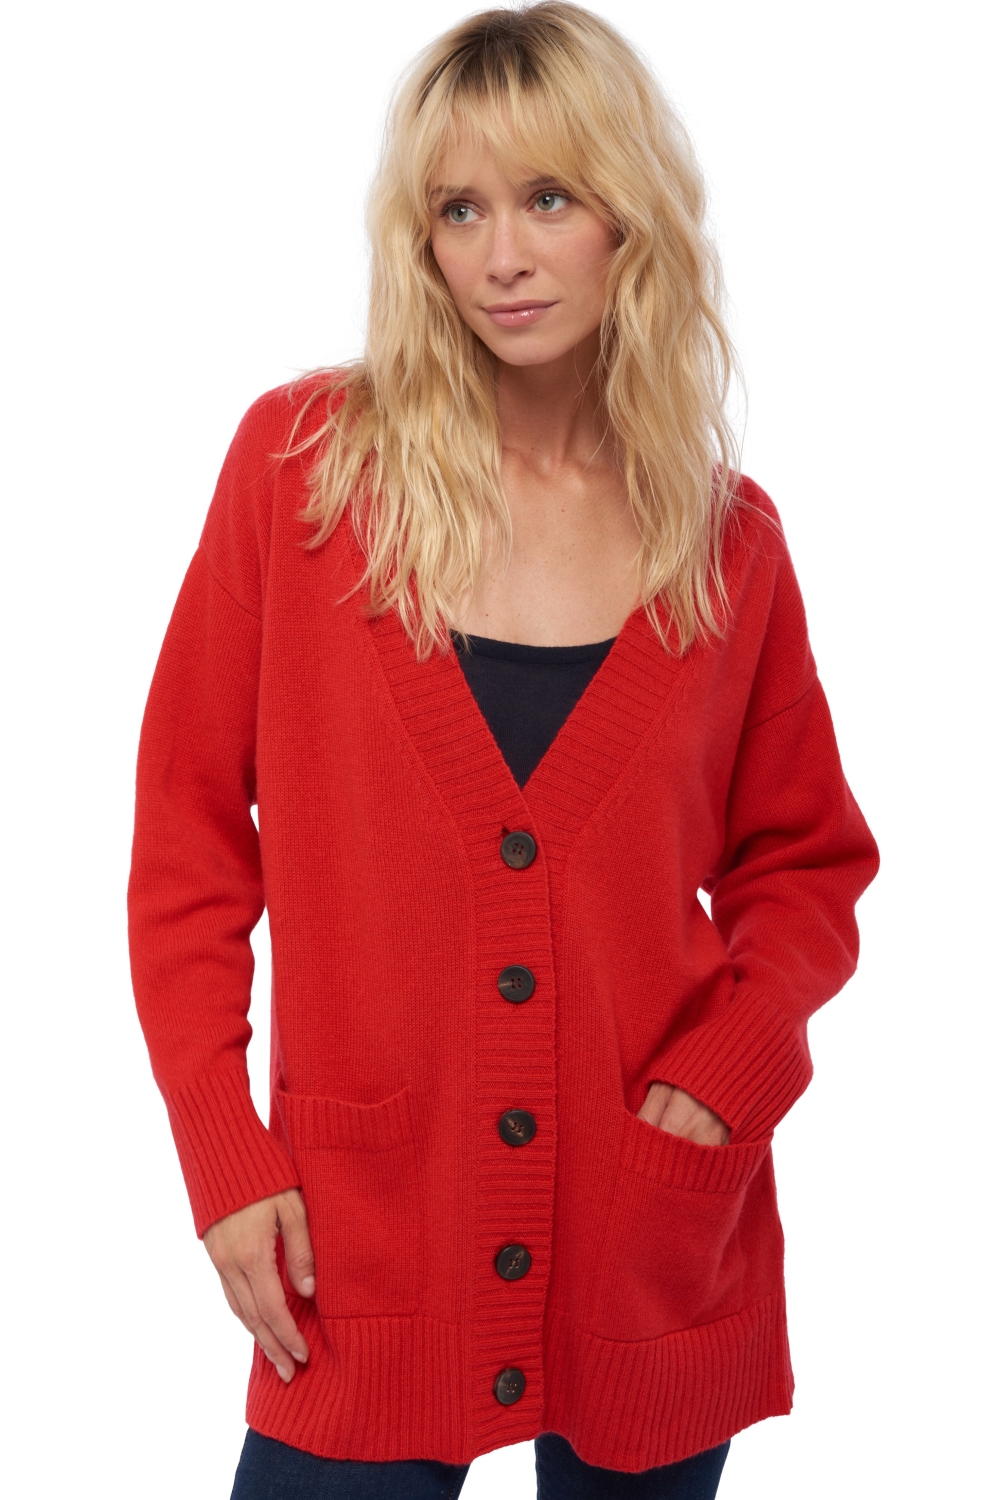 Cashmere ladies chunky sweater vadena rouge m